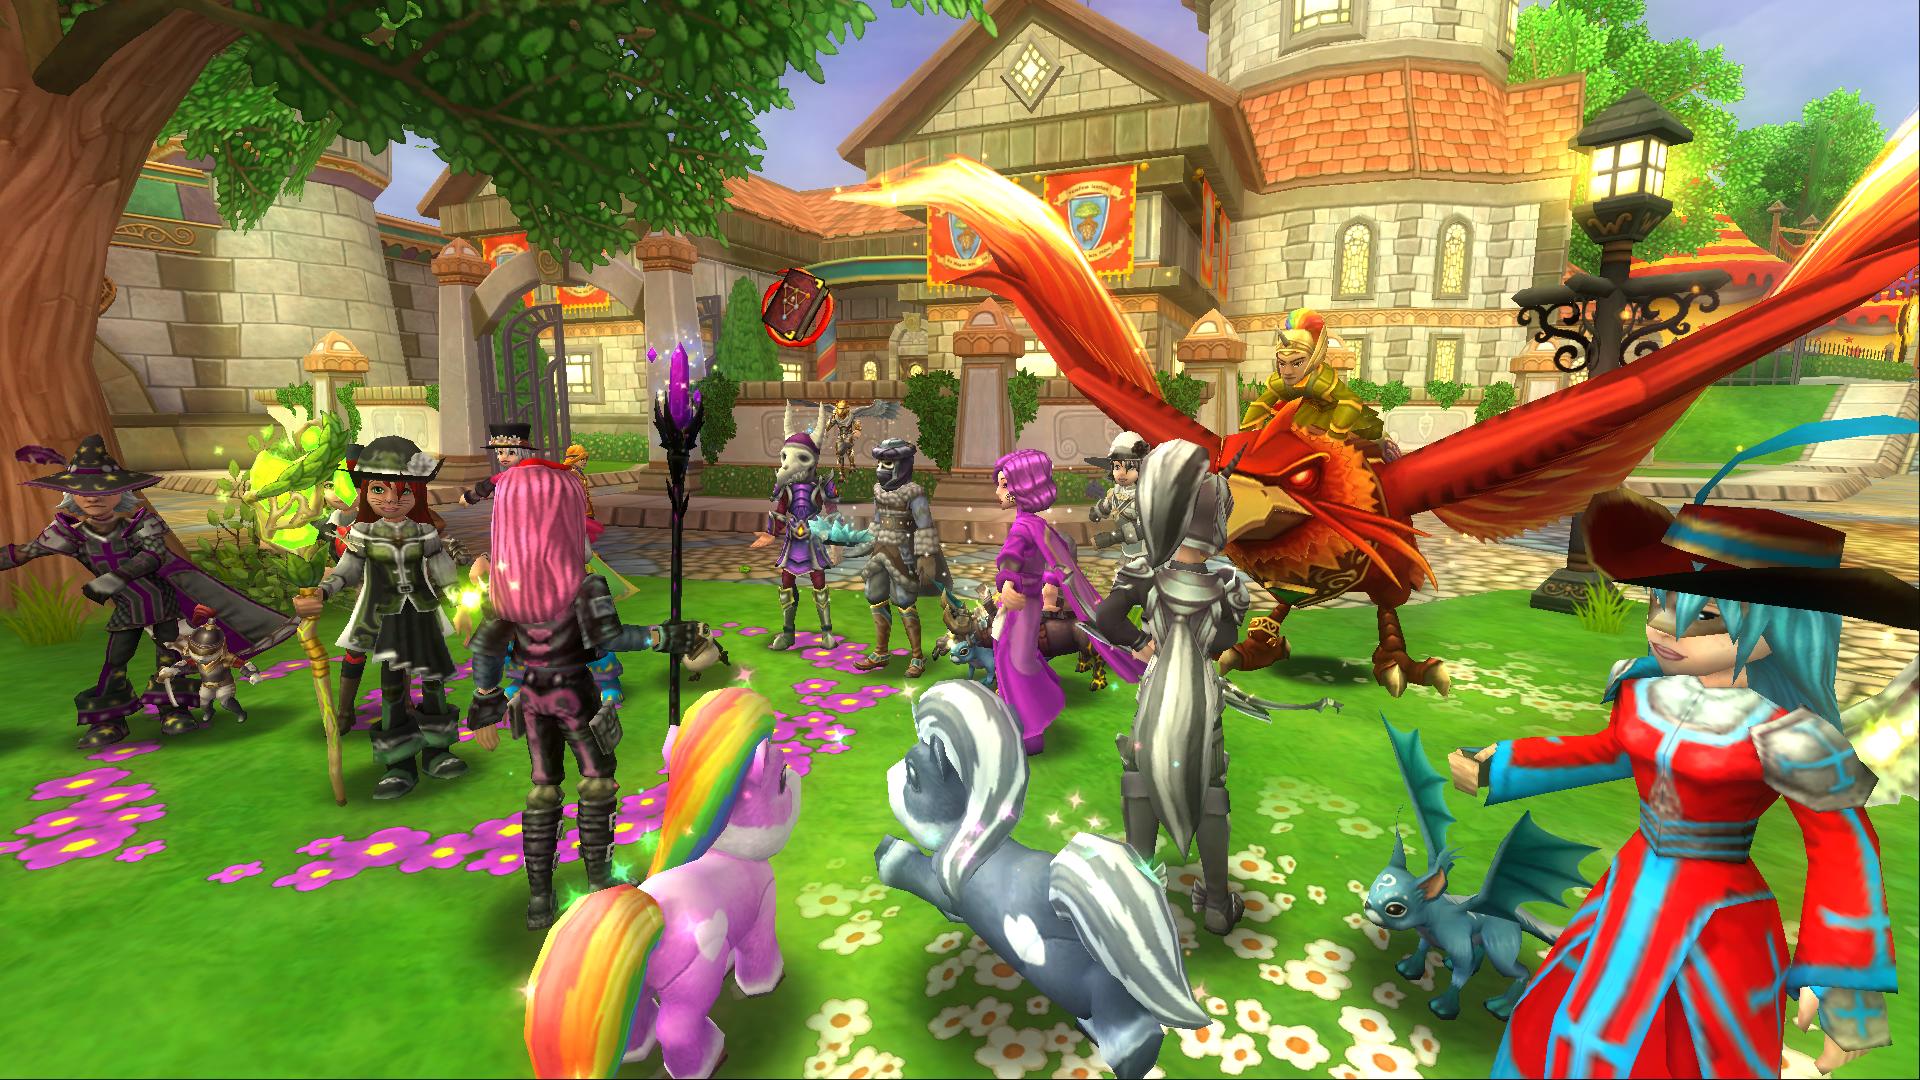 Image for MMO Wizard101 is taken offline after an unhappy developer filled it with angry messages